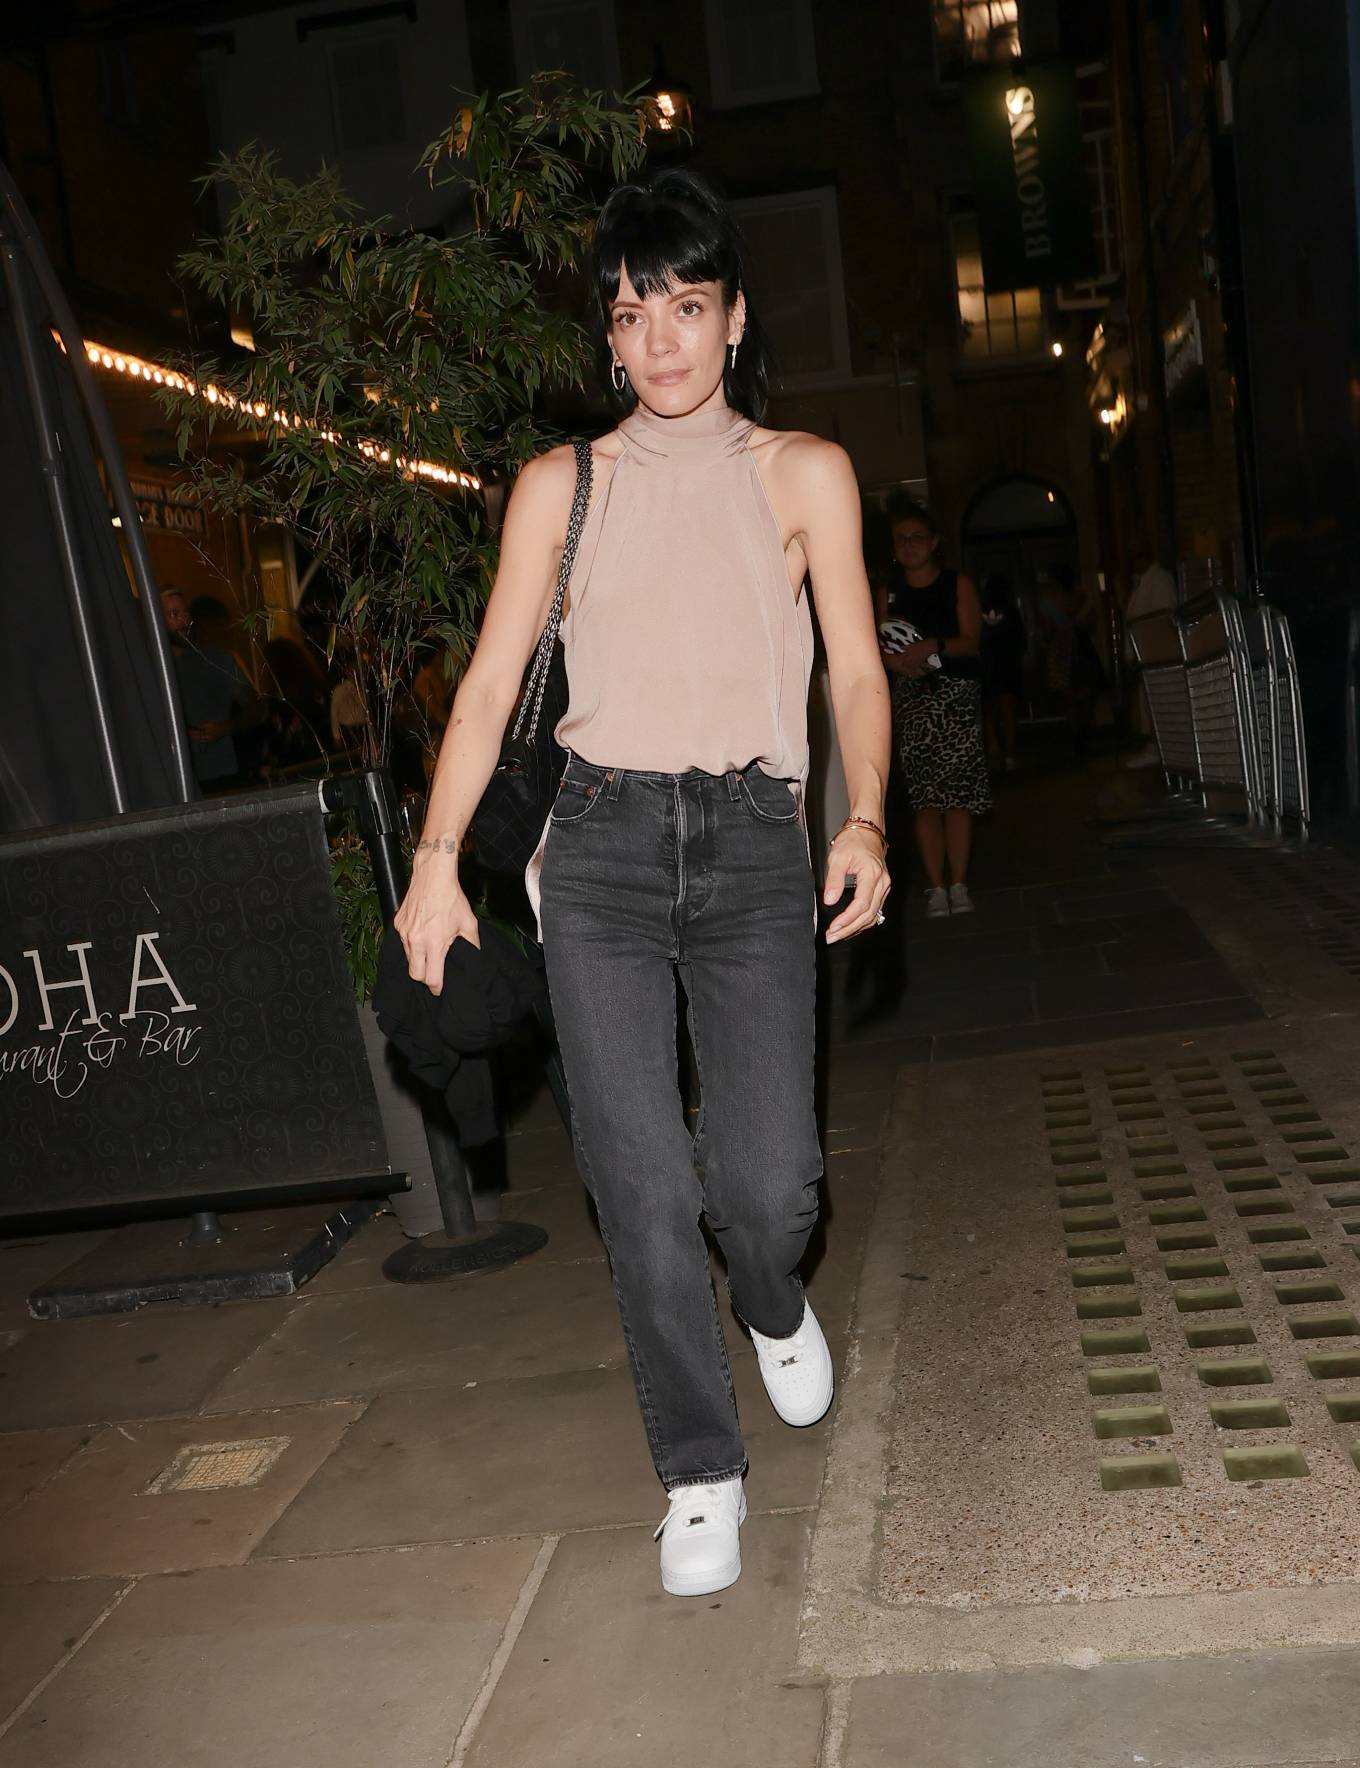 Lily Allen 2021 : Lily Allen – In a denim at 22.2A Ghost Story theatre night in London-04